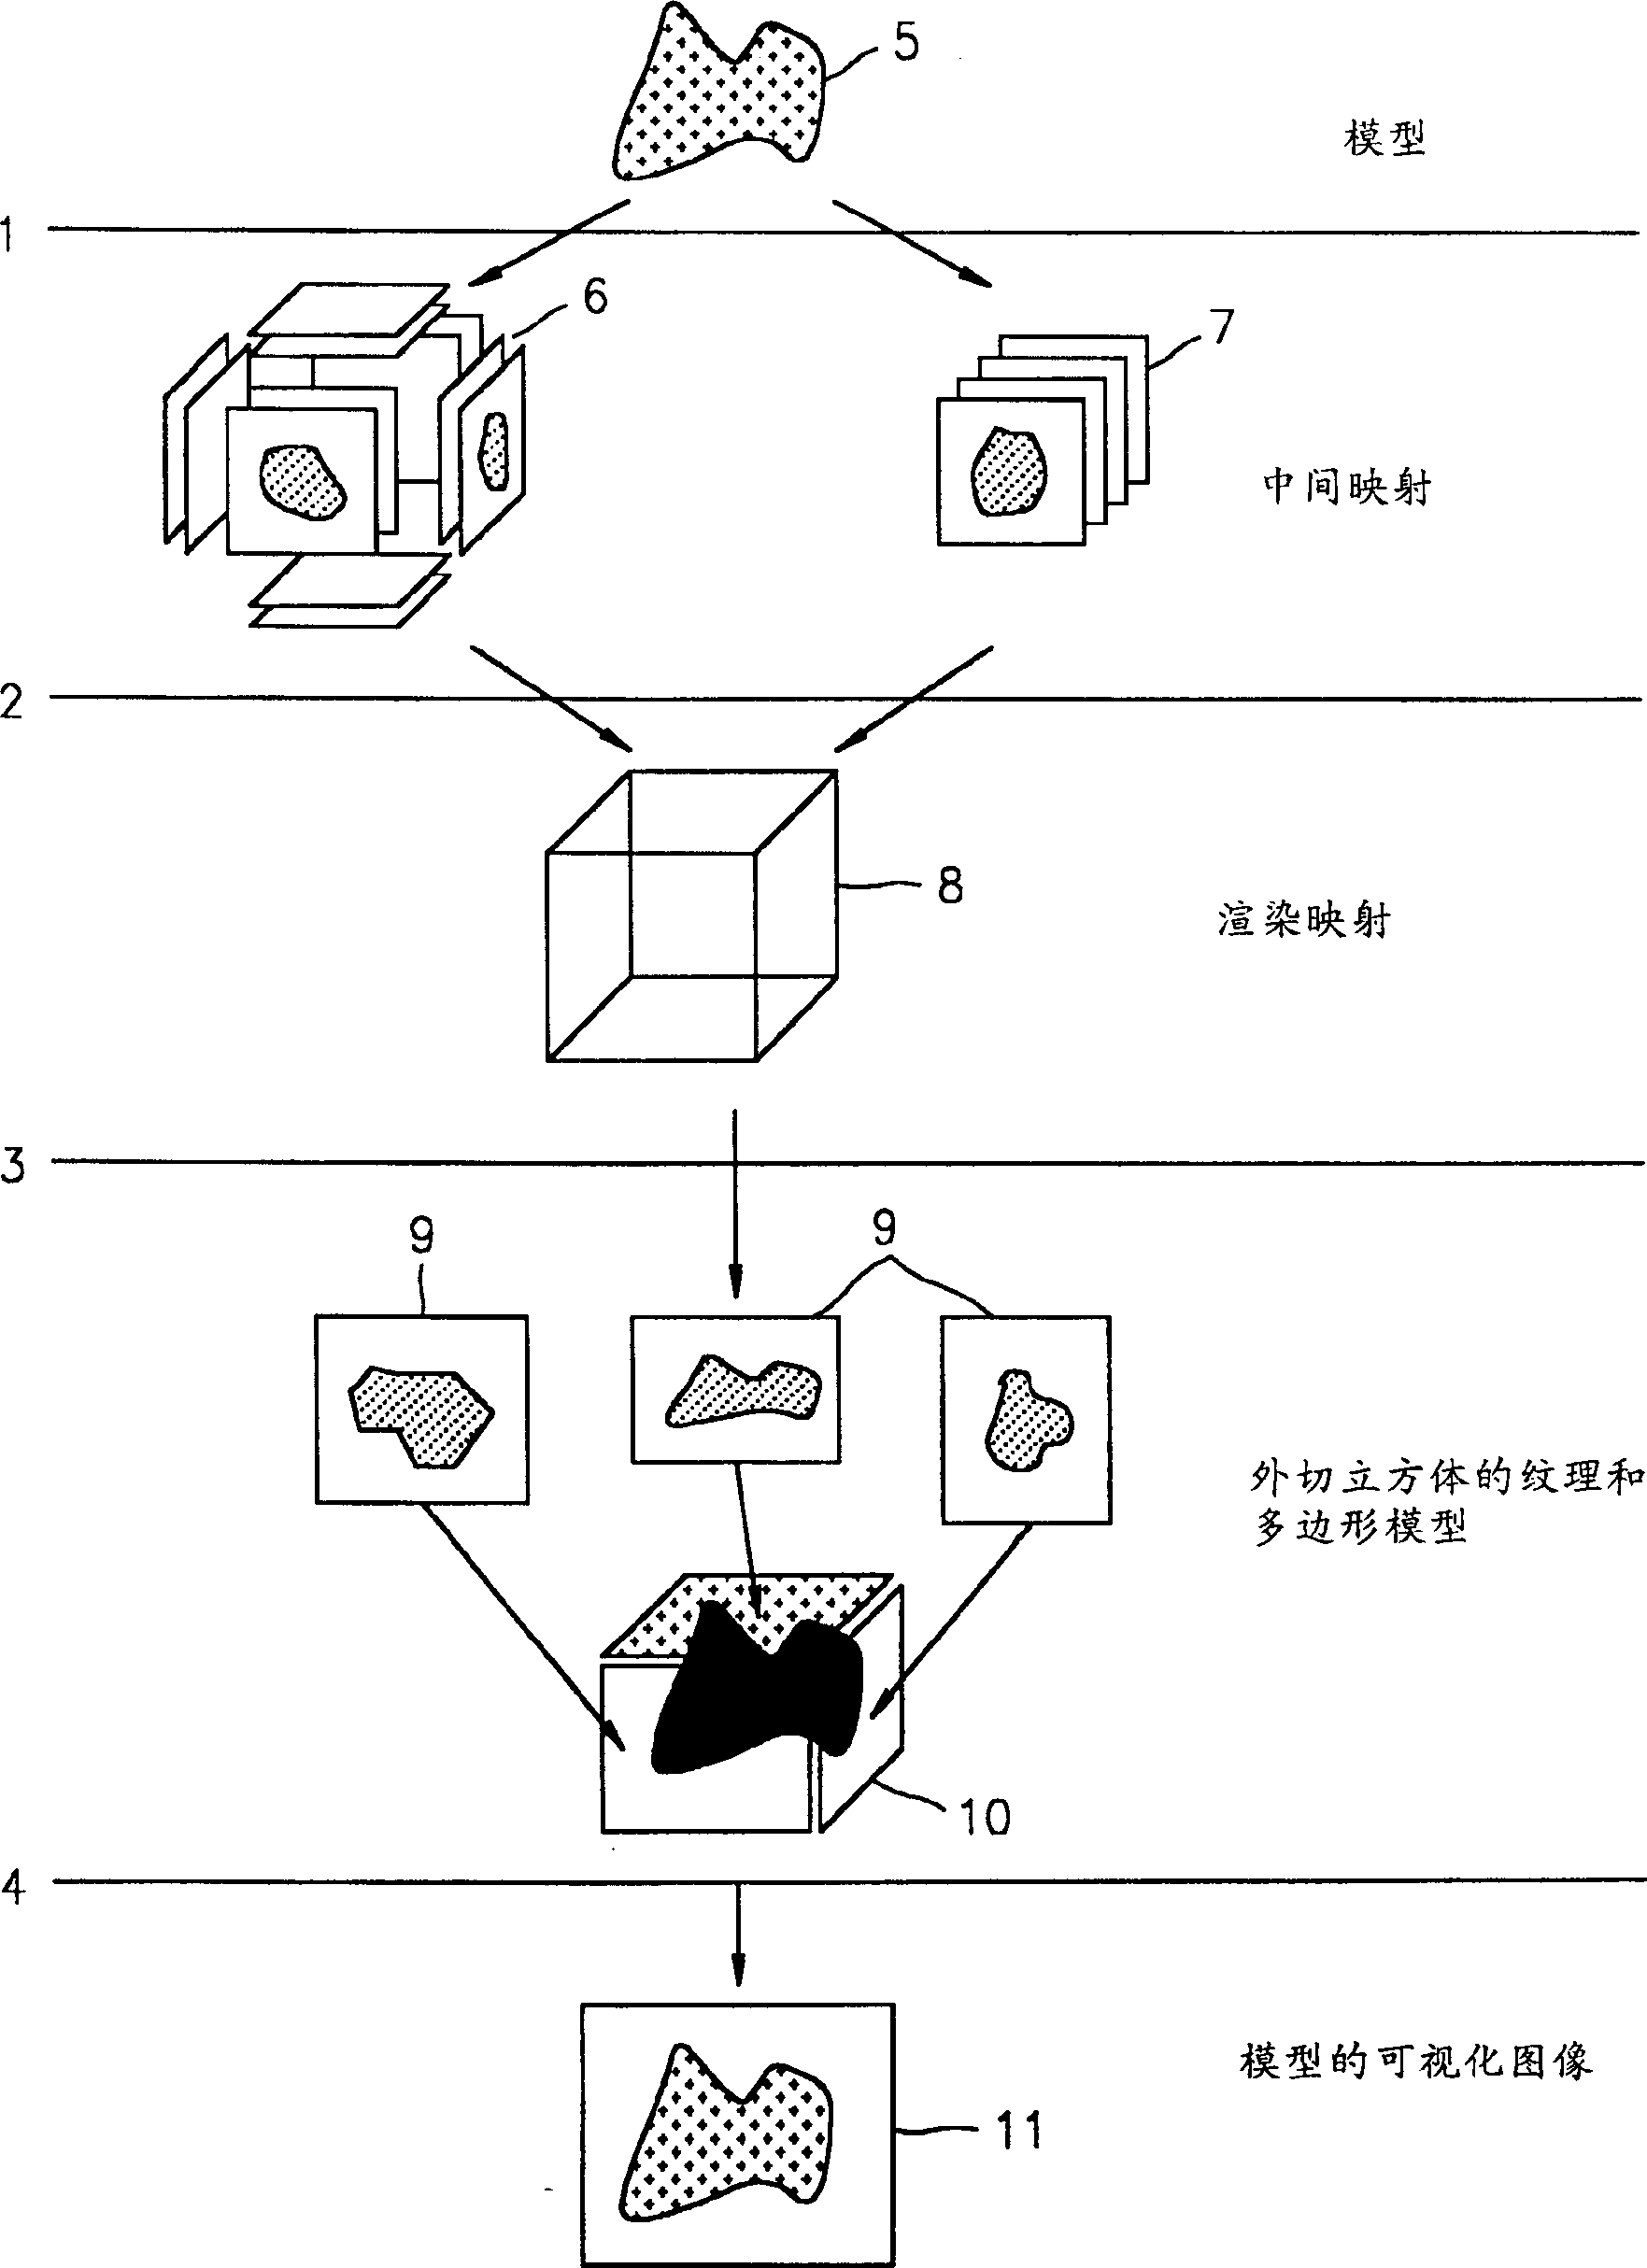 Representation and diawing method of three-D target and method for imaging movable three-D target